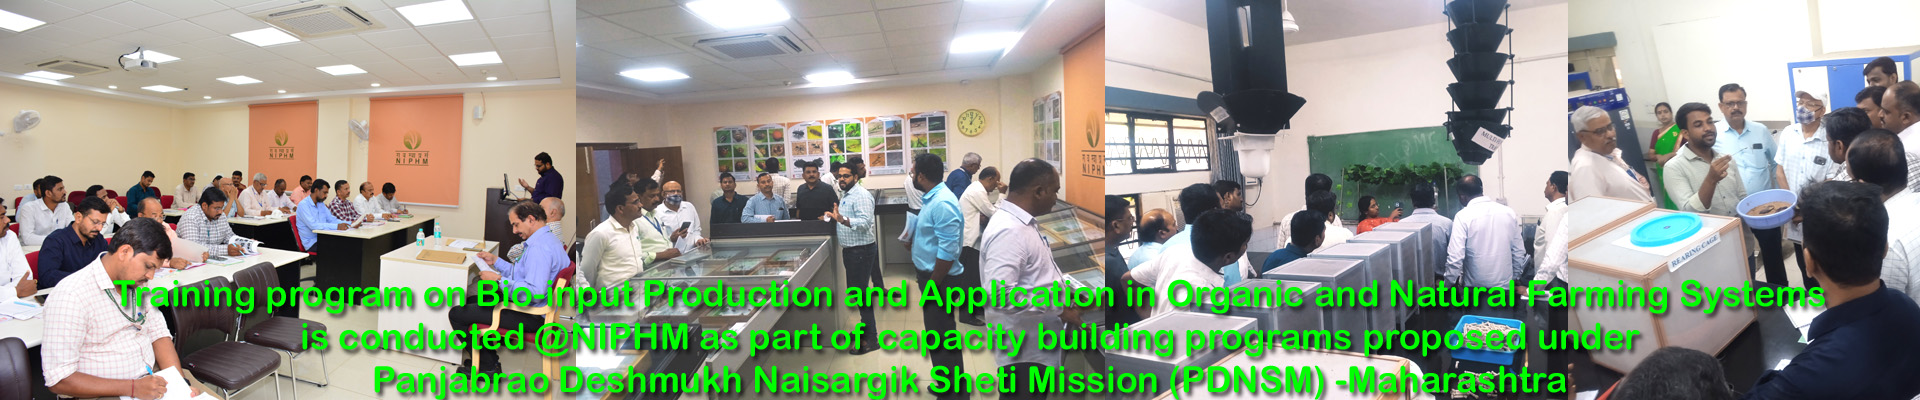 Training program on Bio-input Production and Application in Organic and Natural Farming Systems is conducted @NIPHM as part of capacity building programs proposed under Panjabrao Deshmukh Naisargik Sheti Mission (PDNSM) -Maharashtra